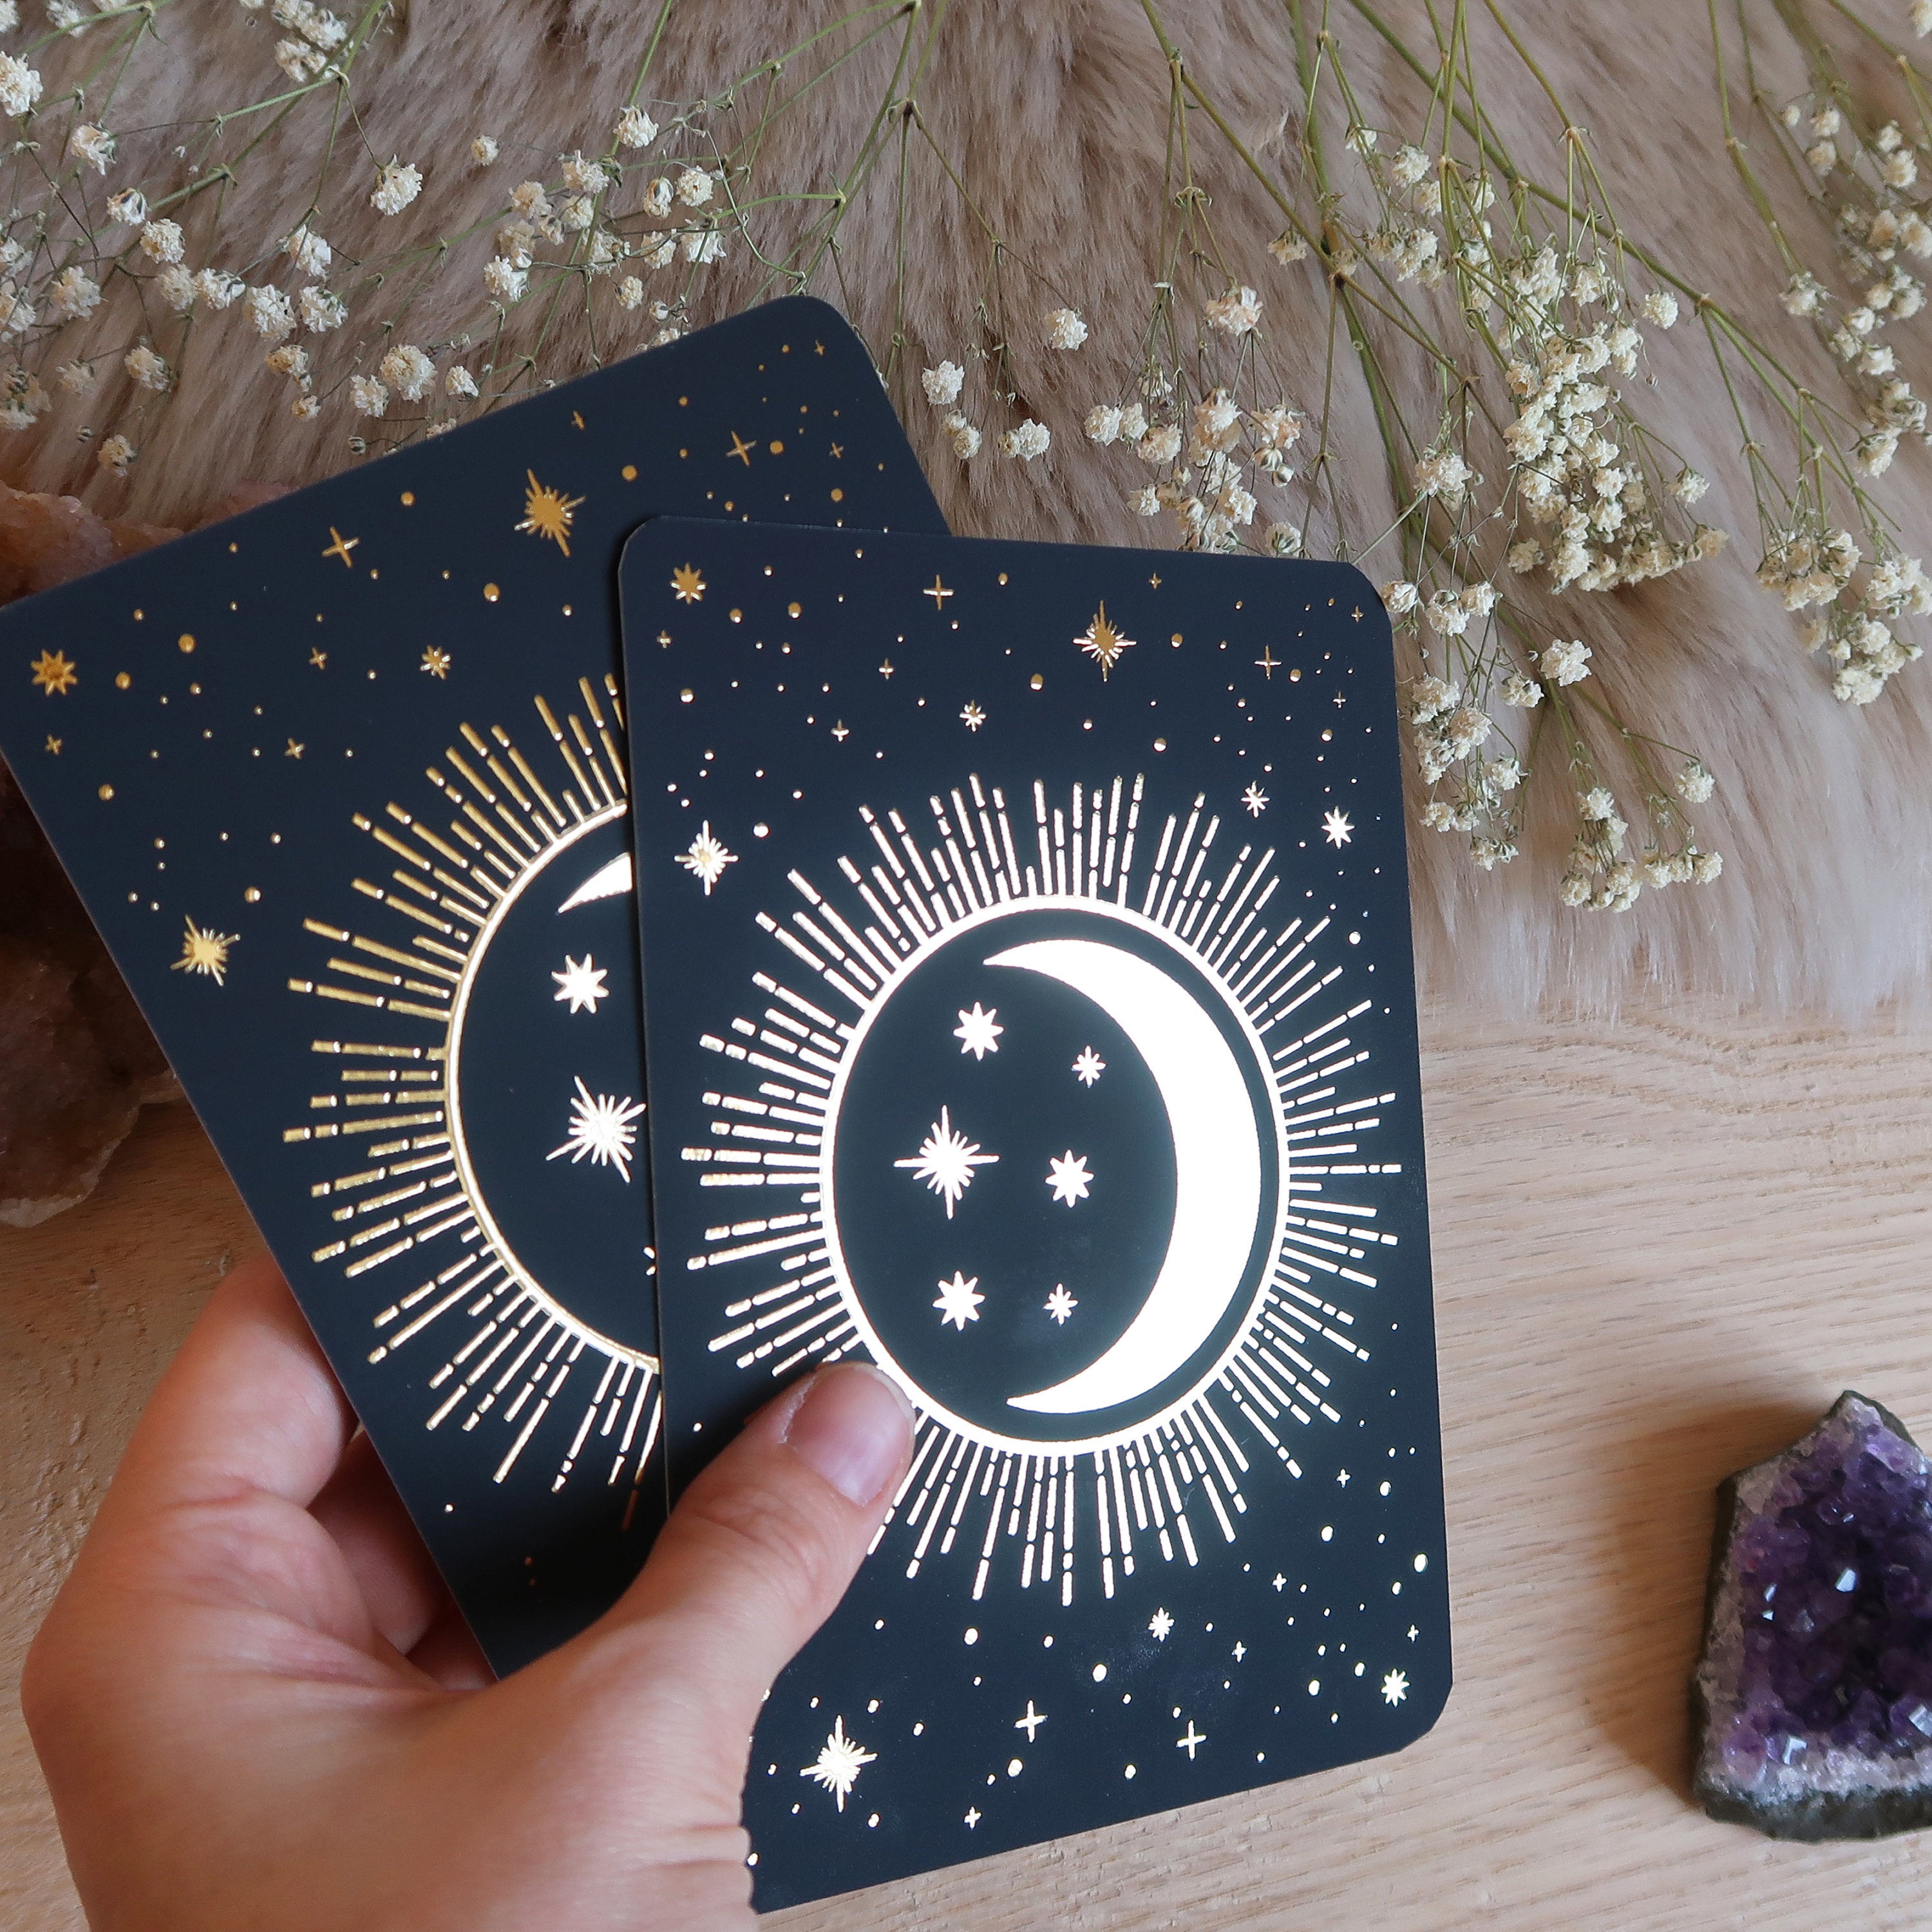 Details about   Girl and moon Altar stand for Tarot Lenormand Oracle card,divination tools 